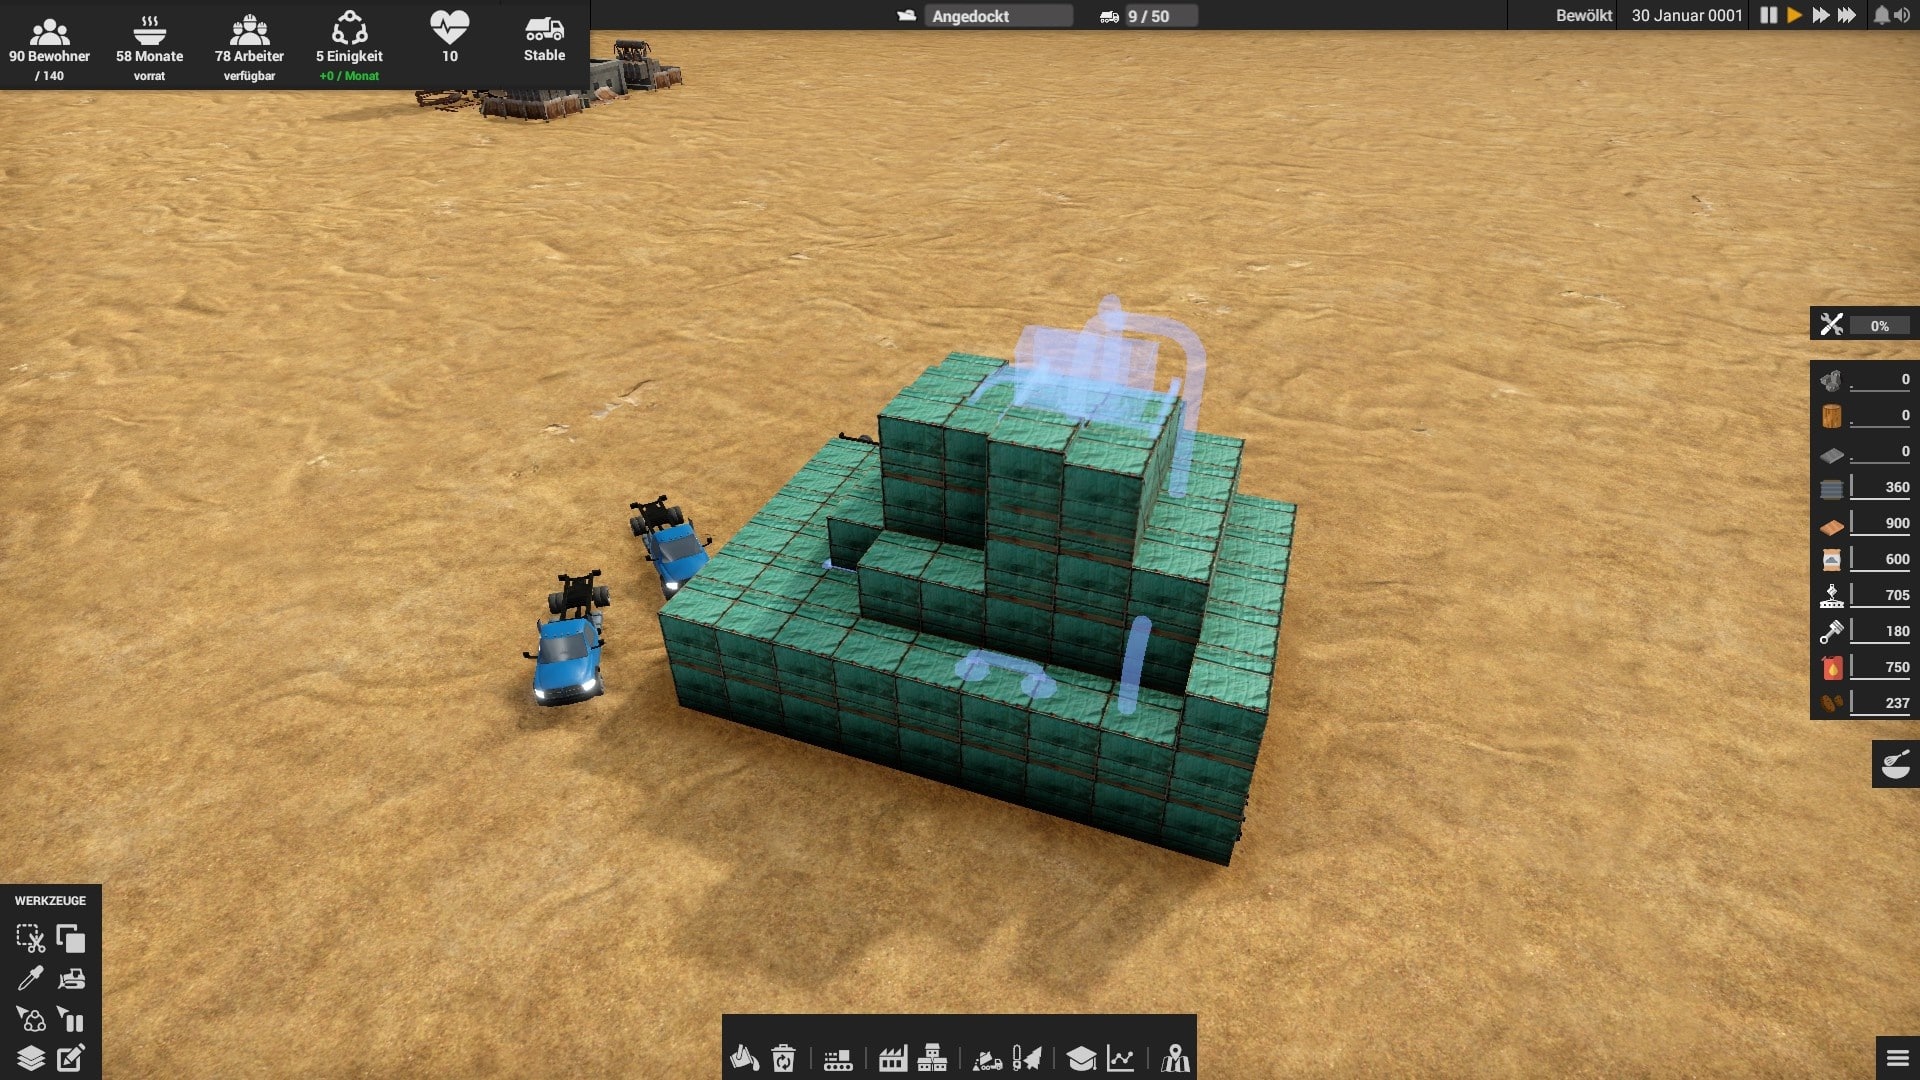 (Building animations consist of turquoise containers mysteriously emerging from the ground and tracing the rough shape of the building. This looks ... interesting looking.)